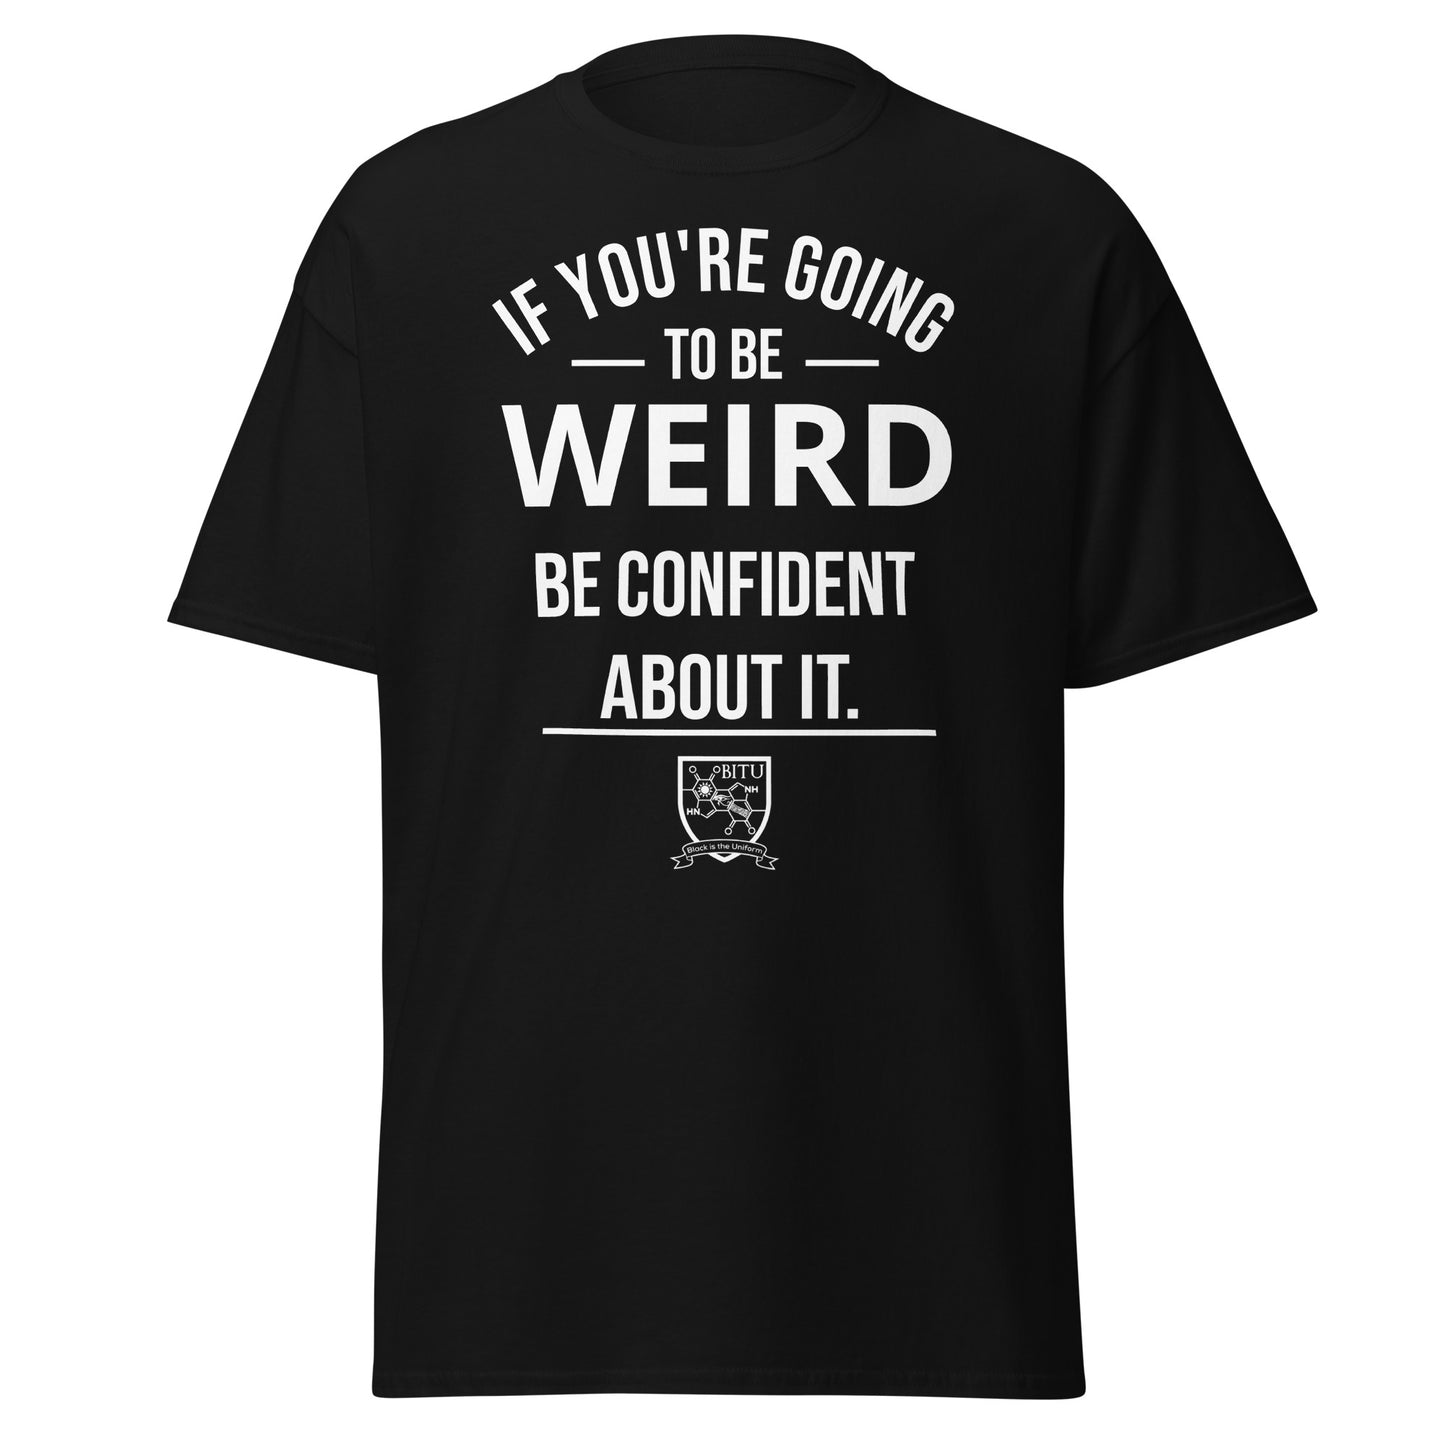 If you are going to be weird, be confident about it